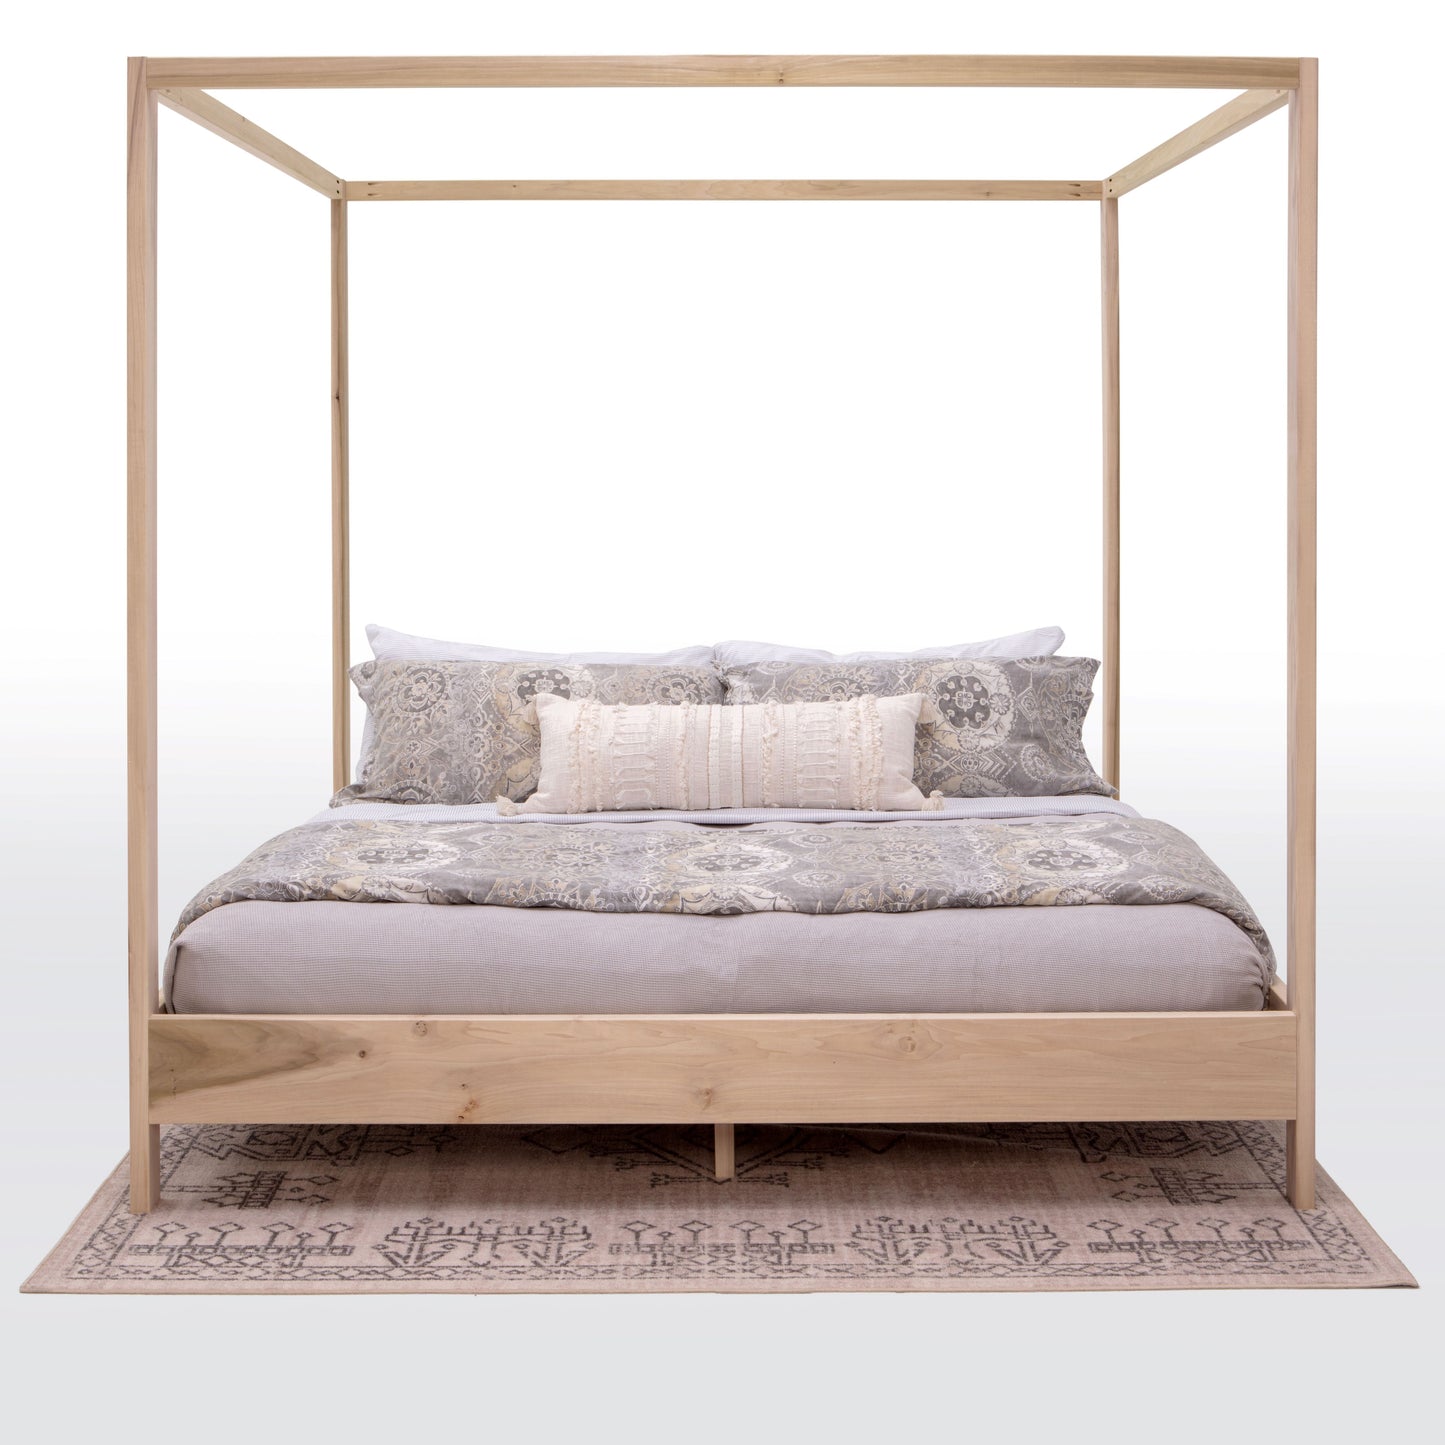 An elegant canopy bed made entirely of rich, polished wood, exuding timeless charm and sophistication. The bed's frame boasts intricate craftsmanship with ornate detailing and smooth, curved lines. Placed in a spacious bedroom with soft lighting and plush furnishings, this wooden canopy bed creates a serene and inviting retreat for rest and relaxation.